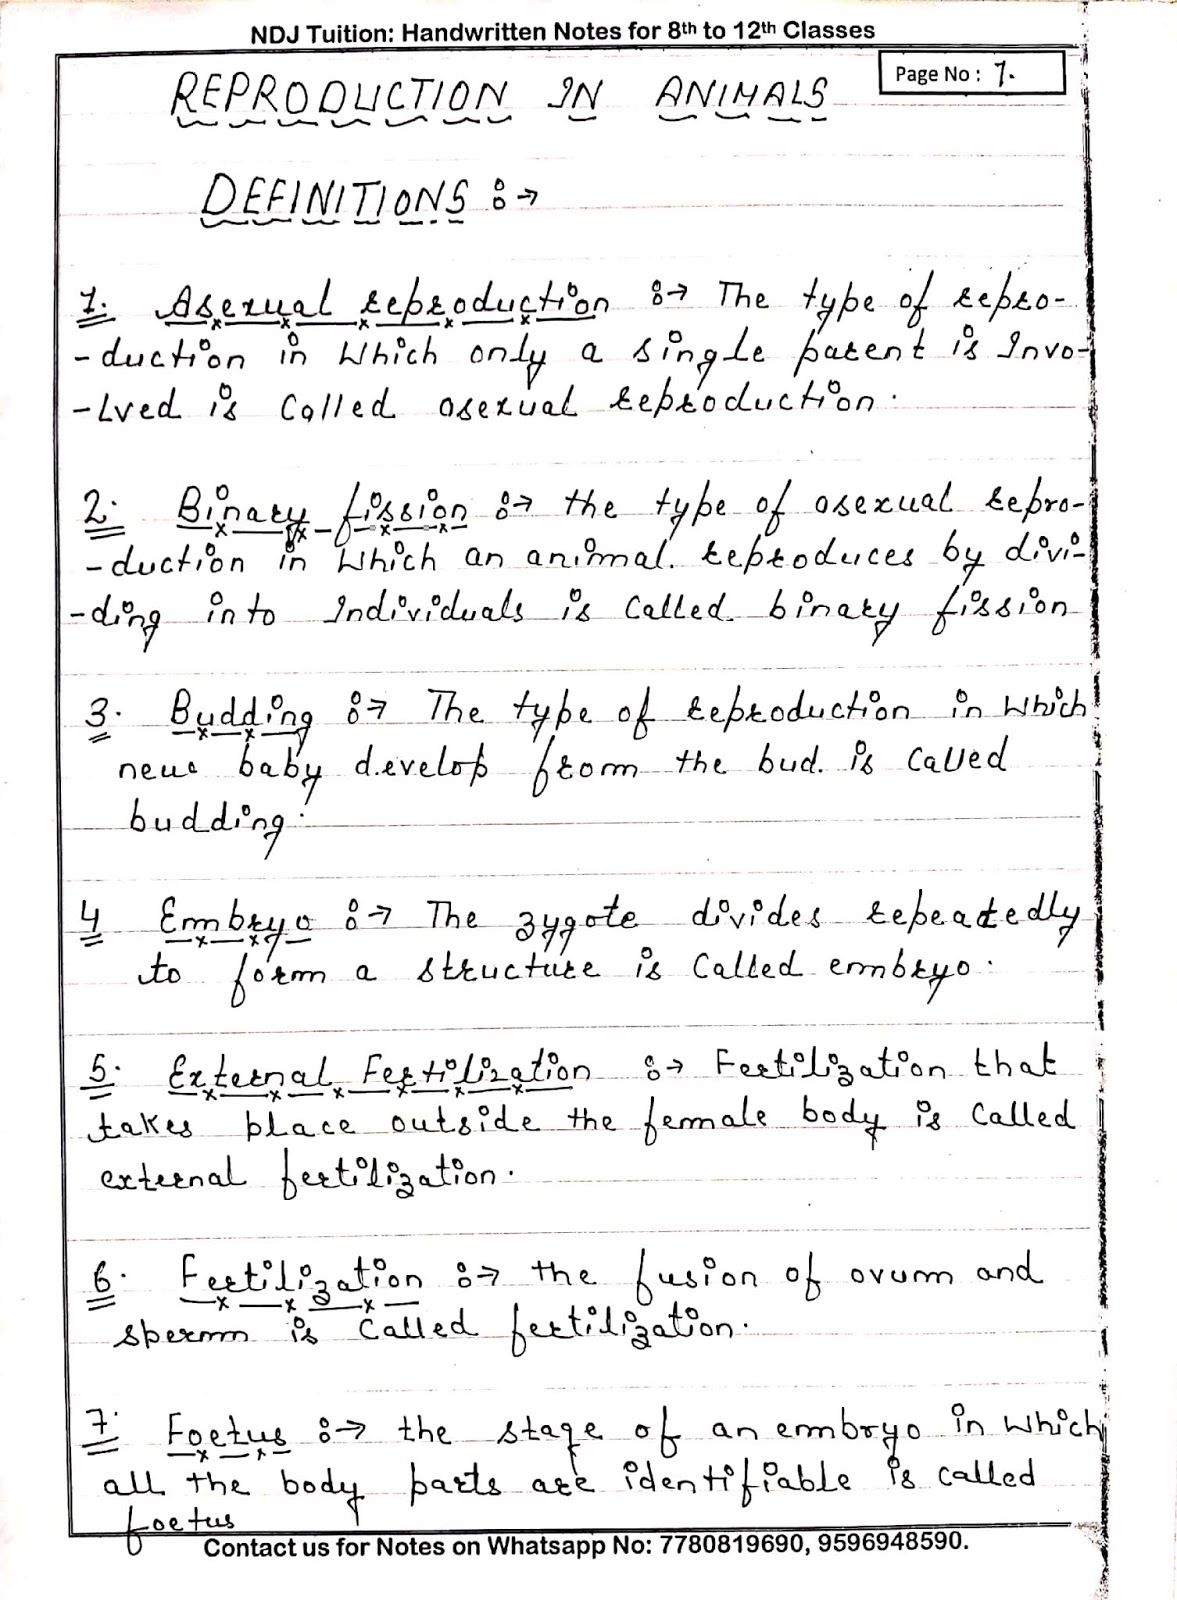 Reproduction in Animals Handwritten Notes for 8th Class Science